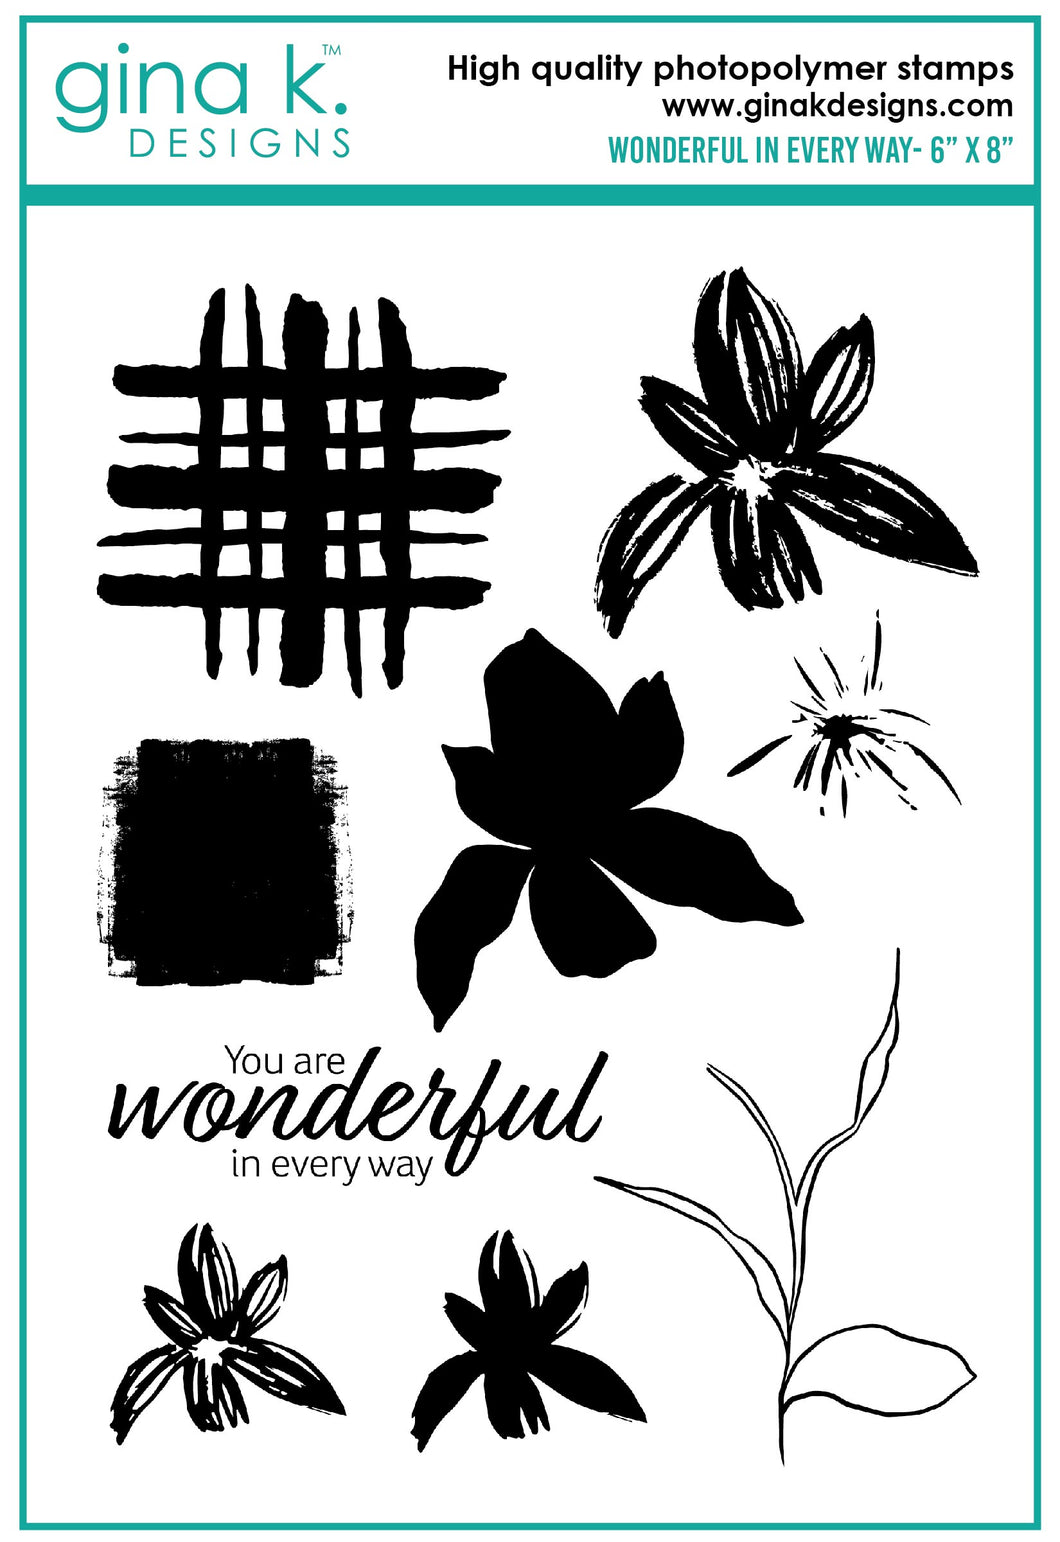 Gina K. Designs - Stamps - Wonderful In Every Way. Wonderful in Every Way is a stamp set by Lisa Hetrick. This set is made of premium clear photopolymer and measures 6